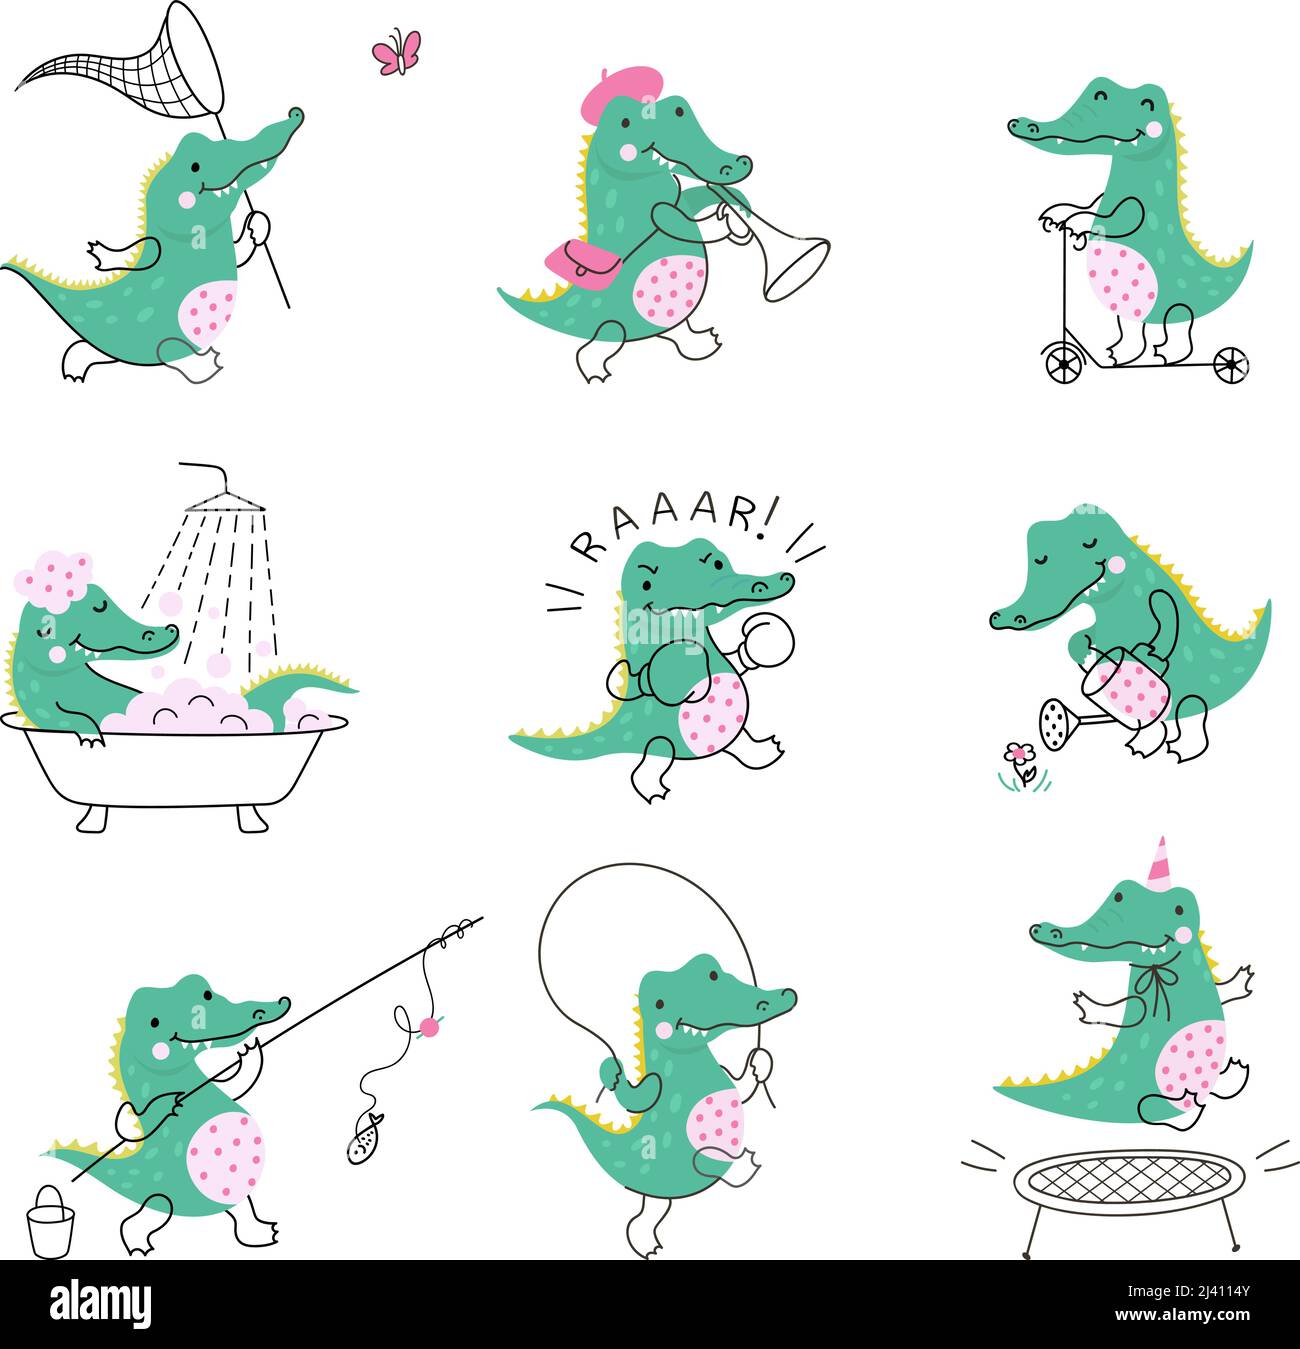 Cartoon crocodile characters. Cute wild crocodiles in humorous situations. Green animal from africa jumping, running, fishing. Nowaday childish vector Stock Vector